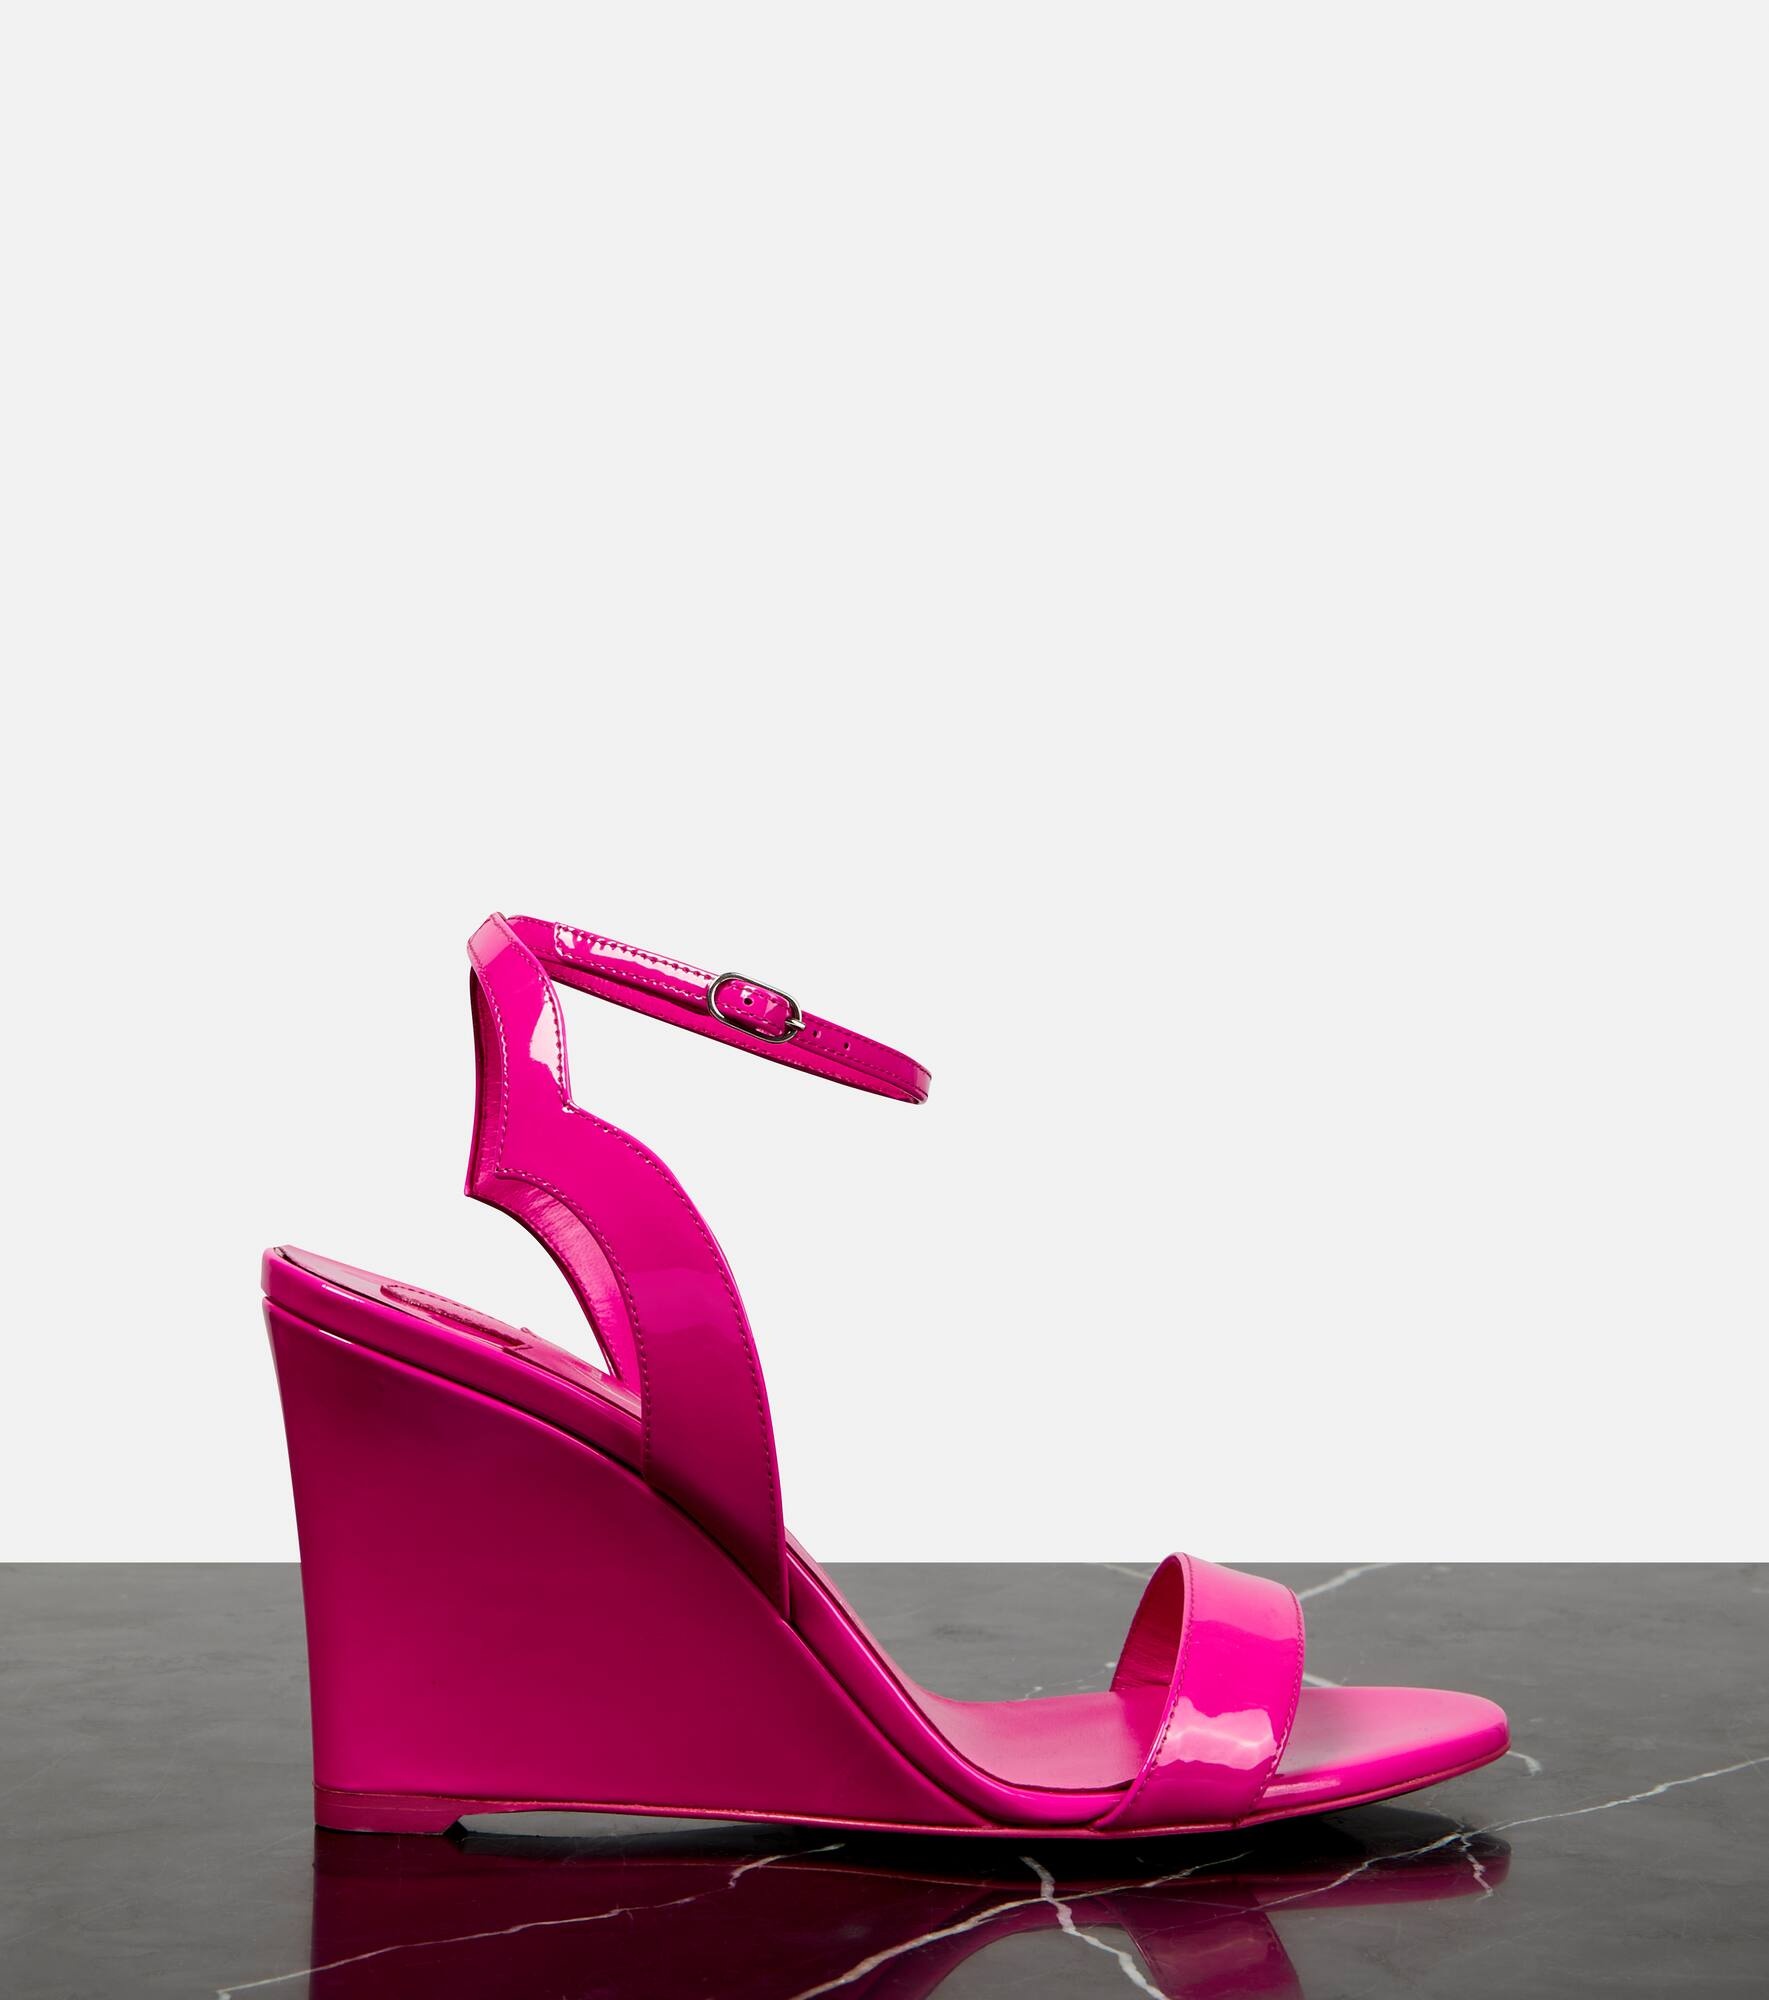 Patent leather wedge sandals - 6